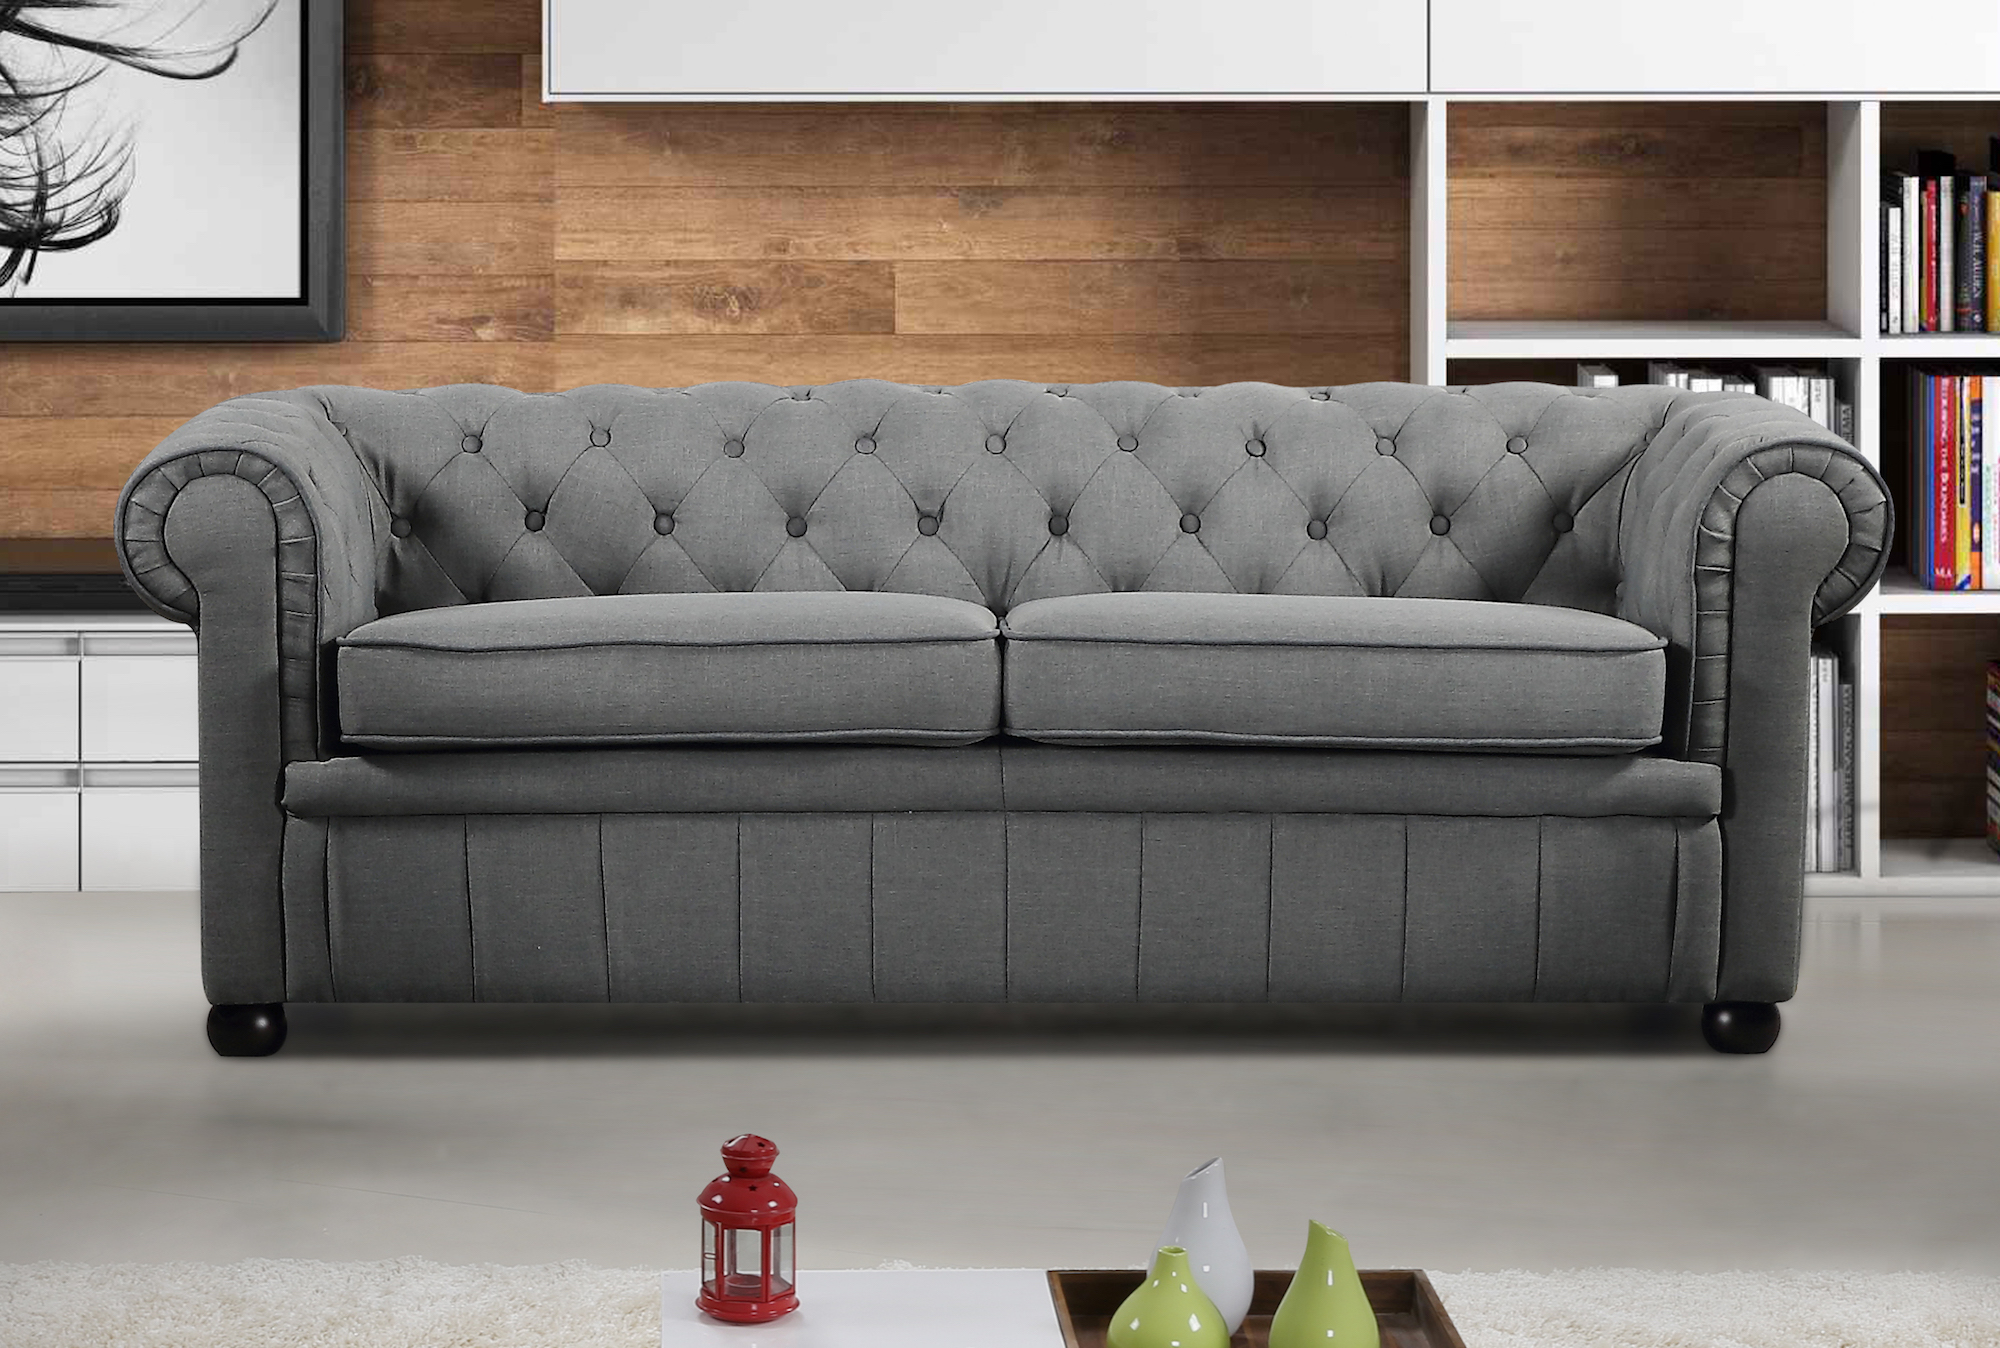 grey leather chesterfield style sofa